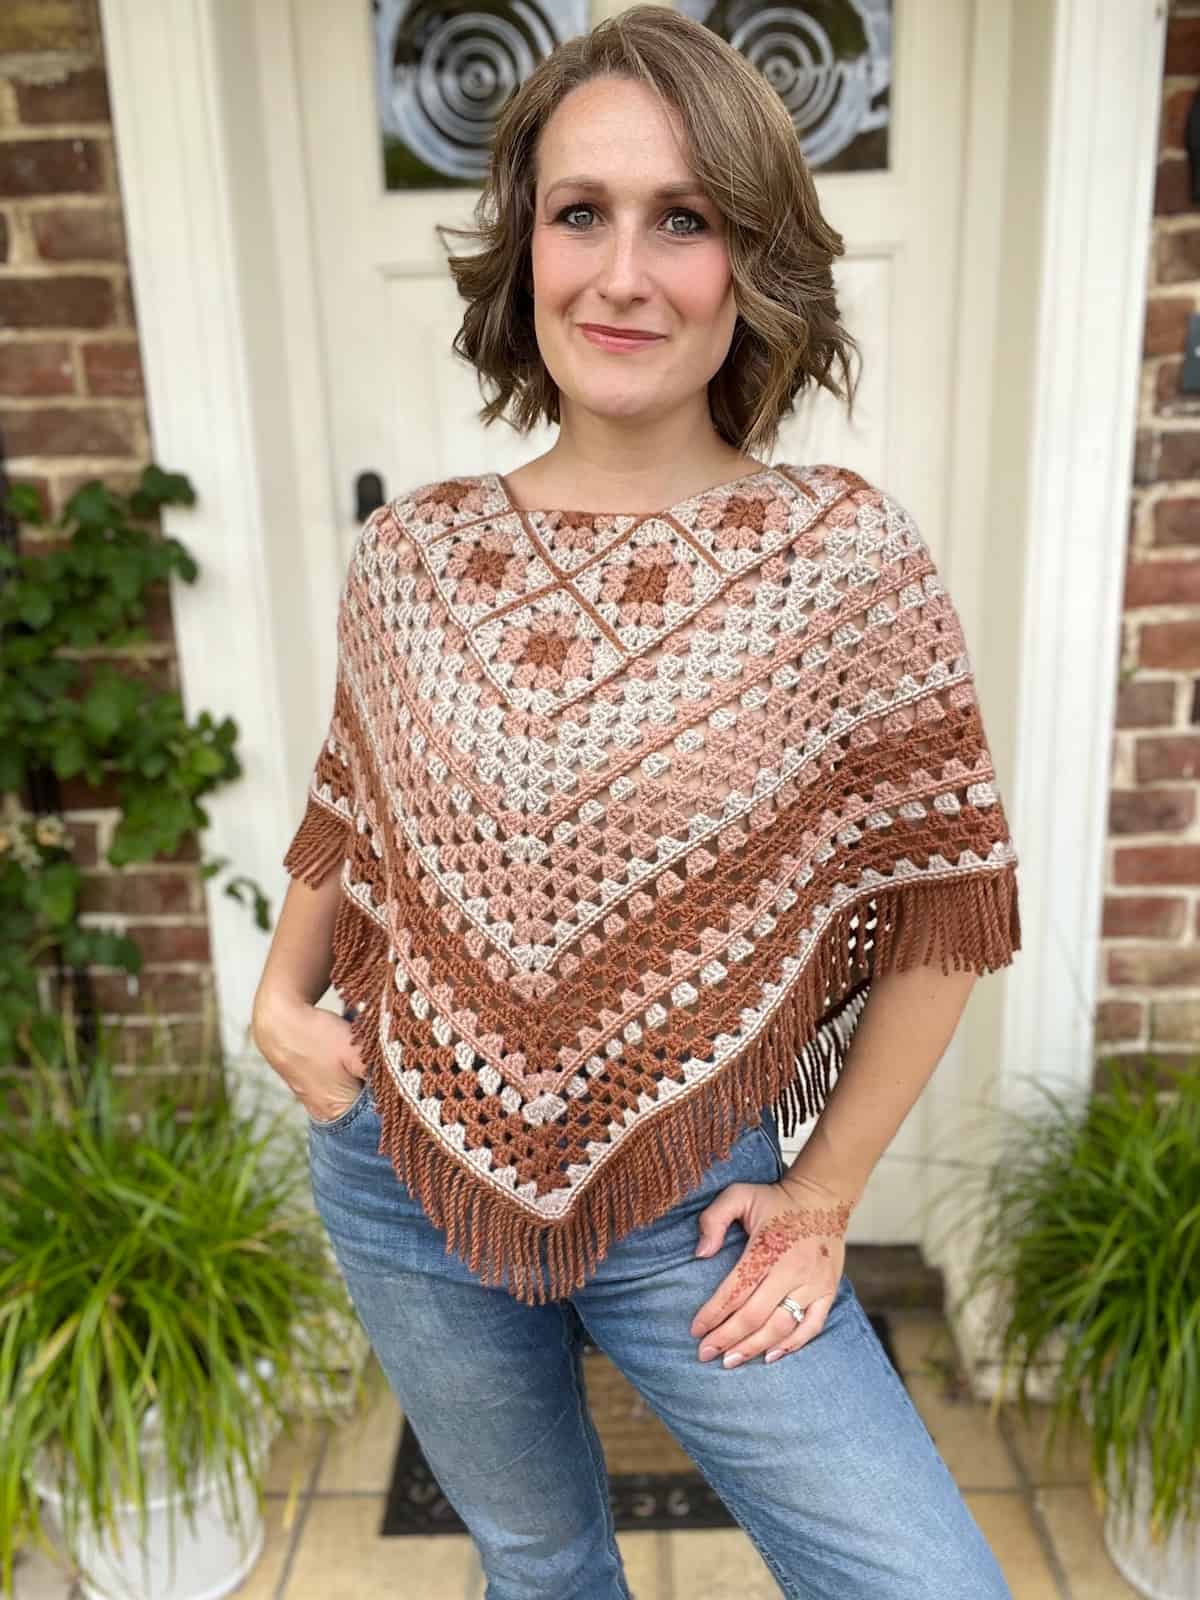 A woman wearing jeans and a crocheted poncho.